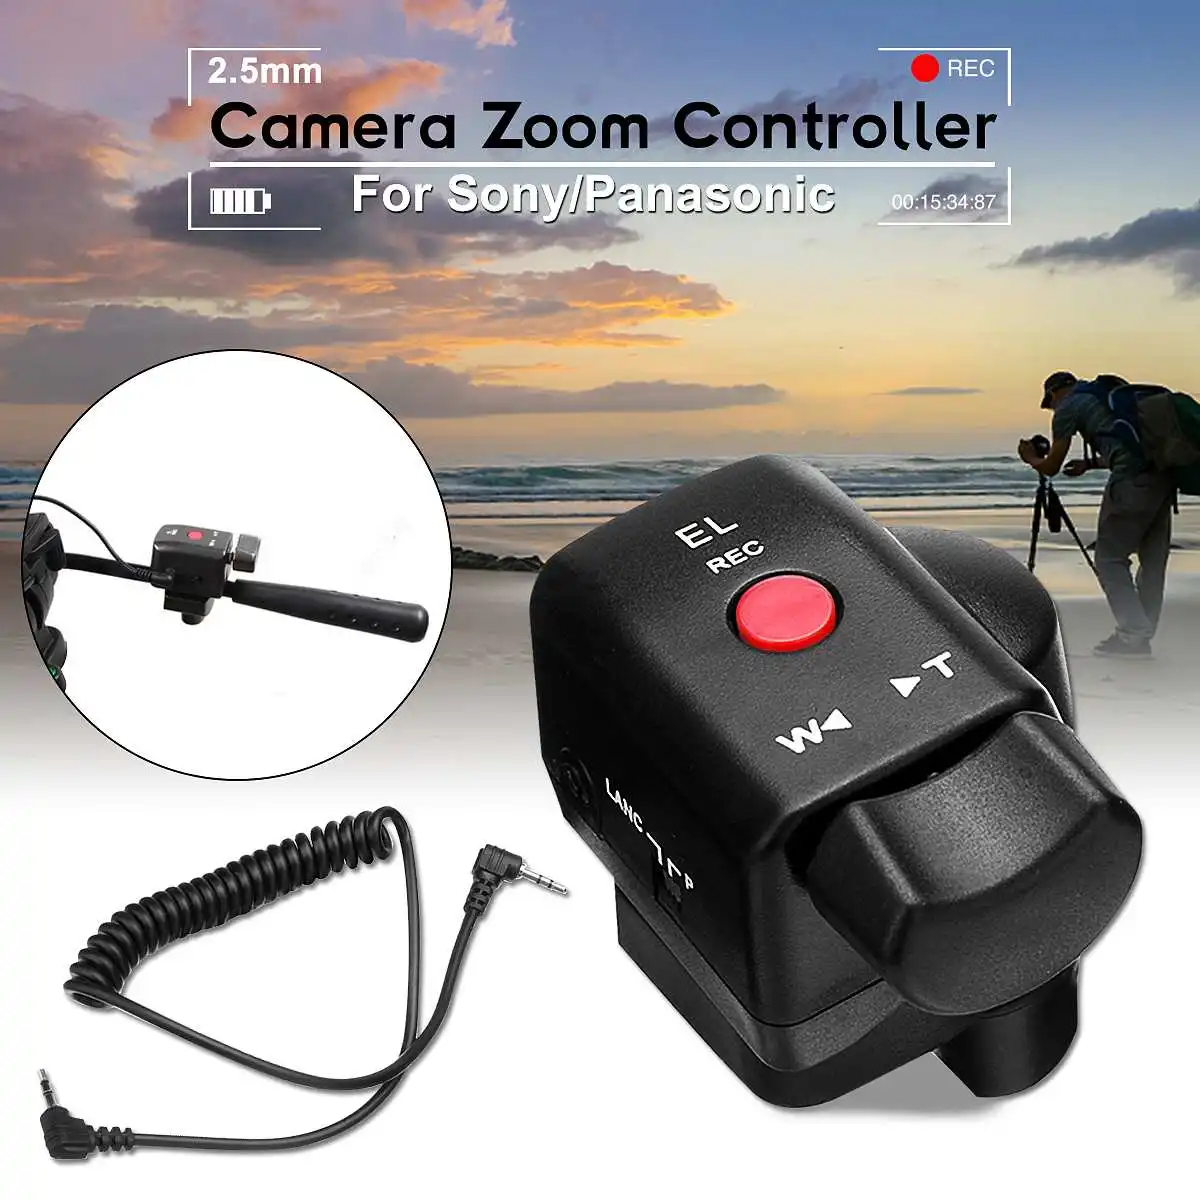 

DSLR Camera Pro Zoom Control for Sony LANC A1C 150P for Panasonic 180A 130AC DV ACC Remote Controller for Fotografica Video